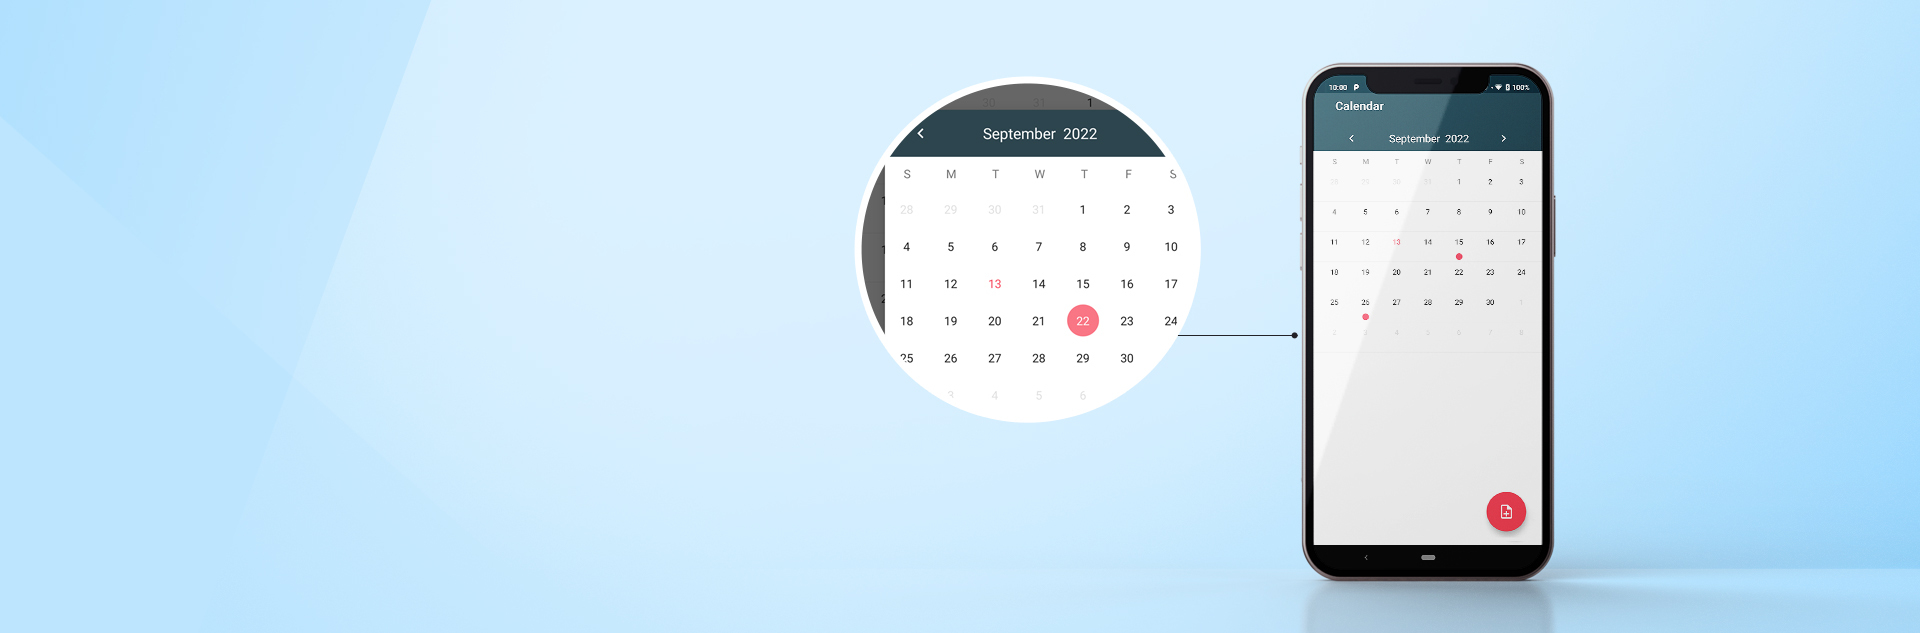 MaterialCalendarView